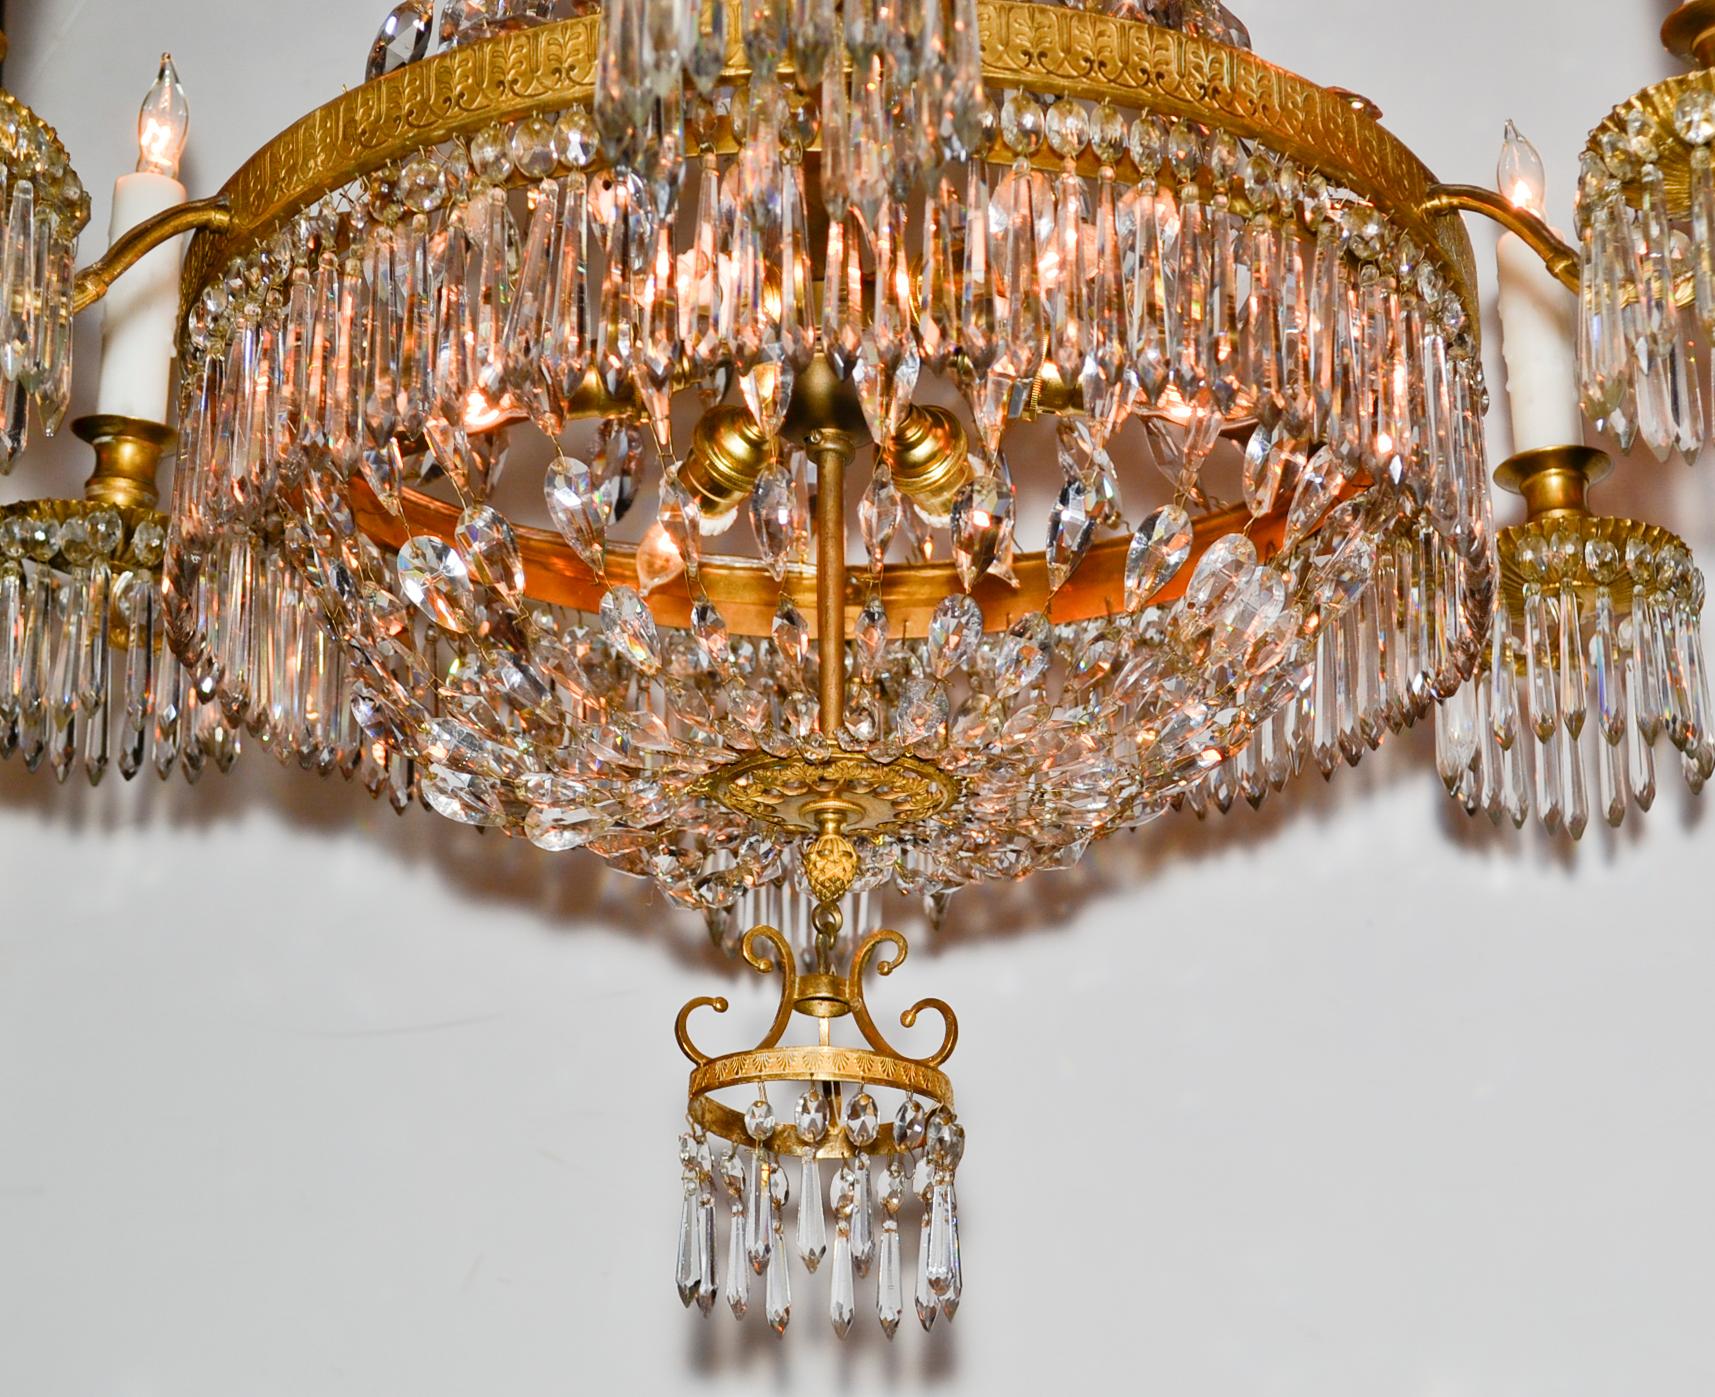 Great 19th century French pagoda inspired bronze and crystal 12-light chandelier.